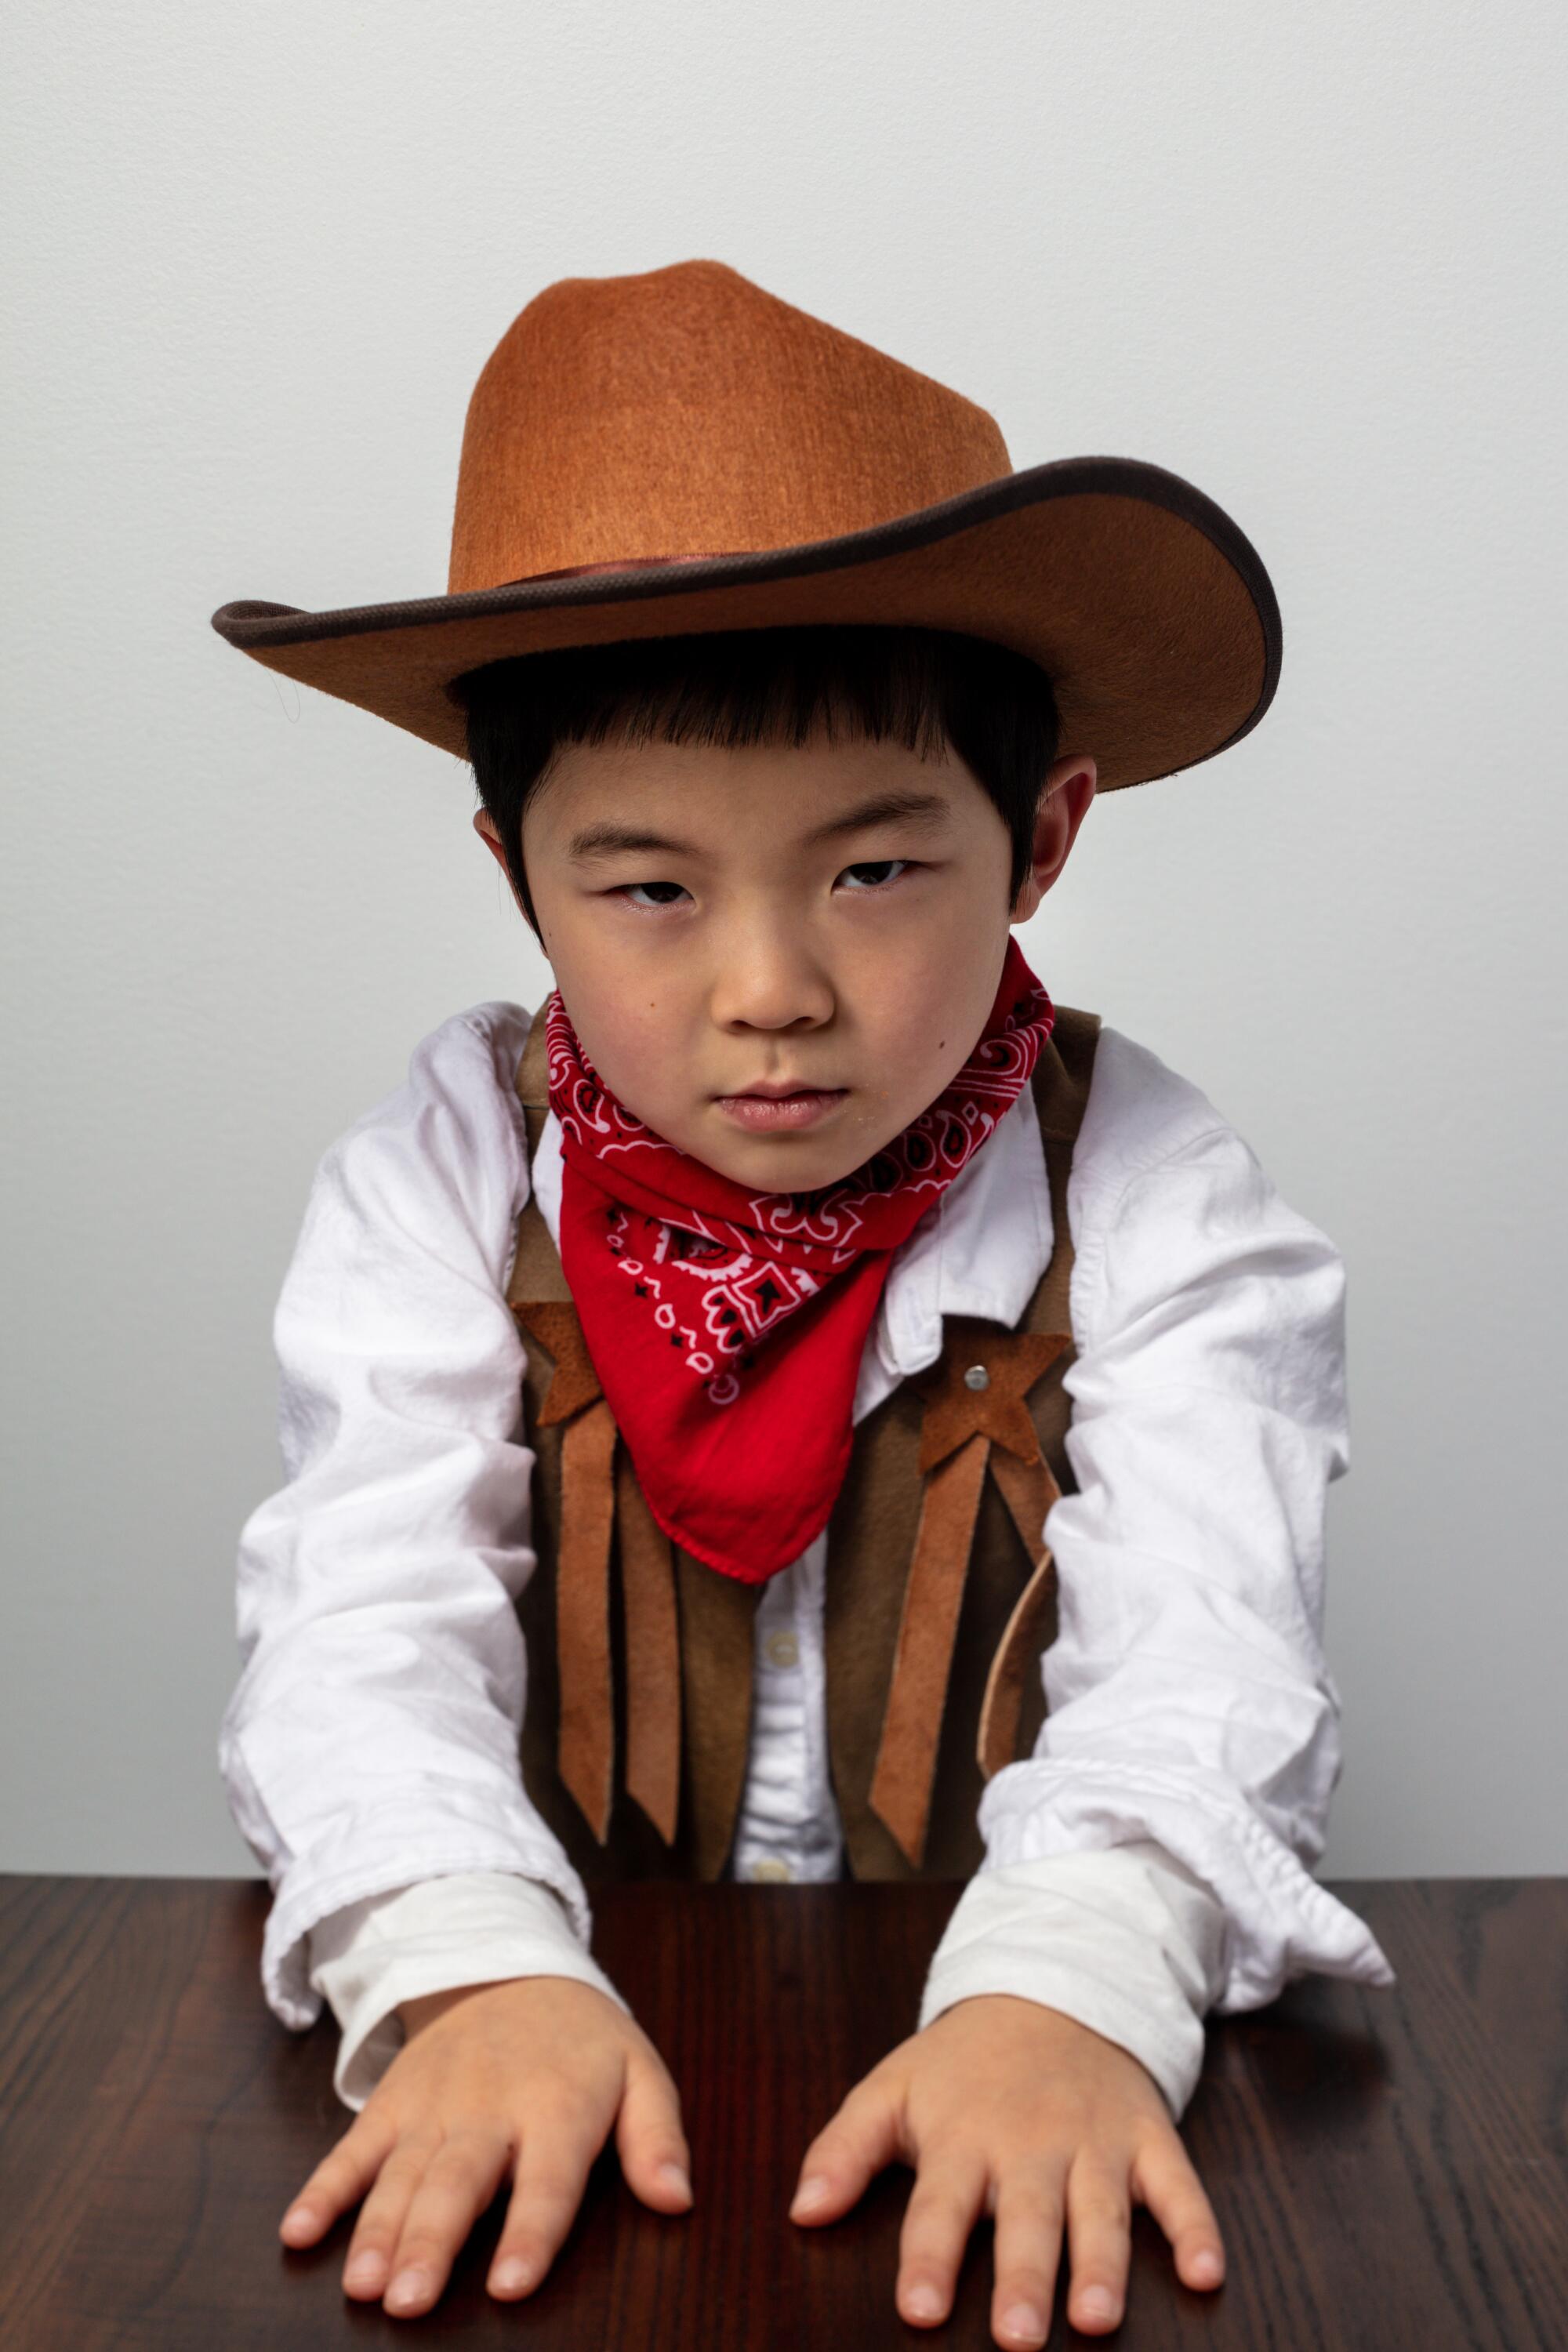 Alan Kim, in a cowboy costume, places his cards, or his hands, at least, on a table, western style.